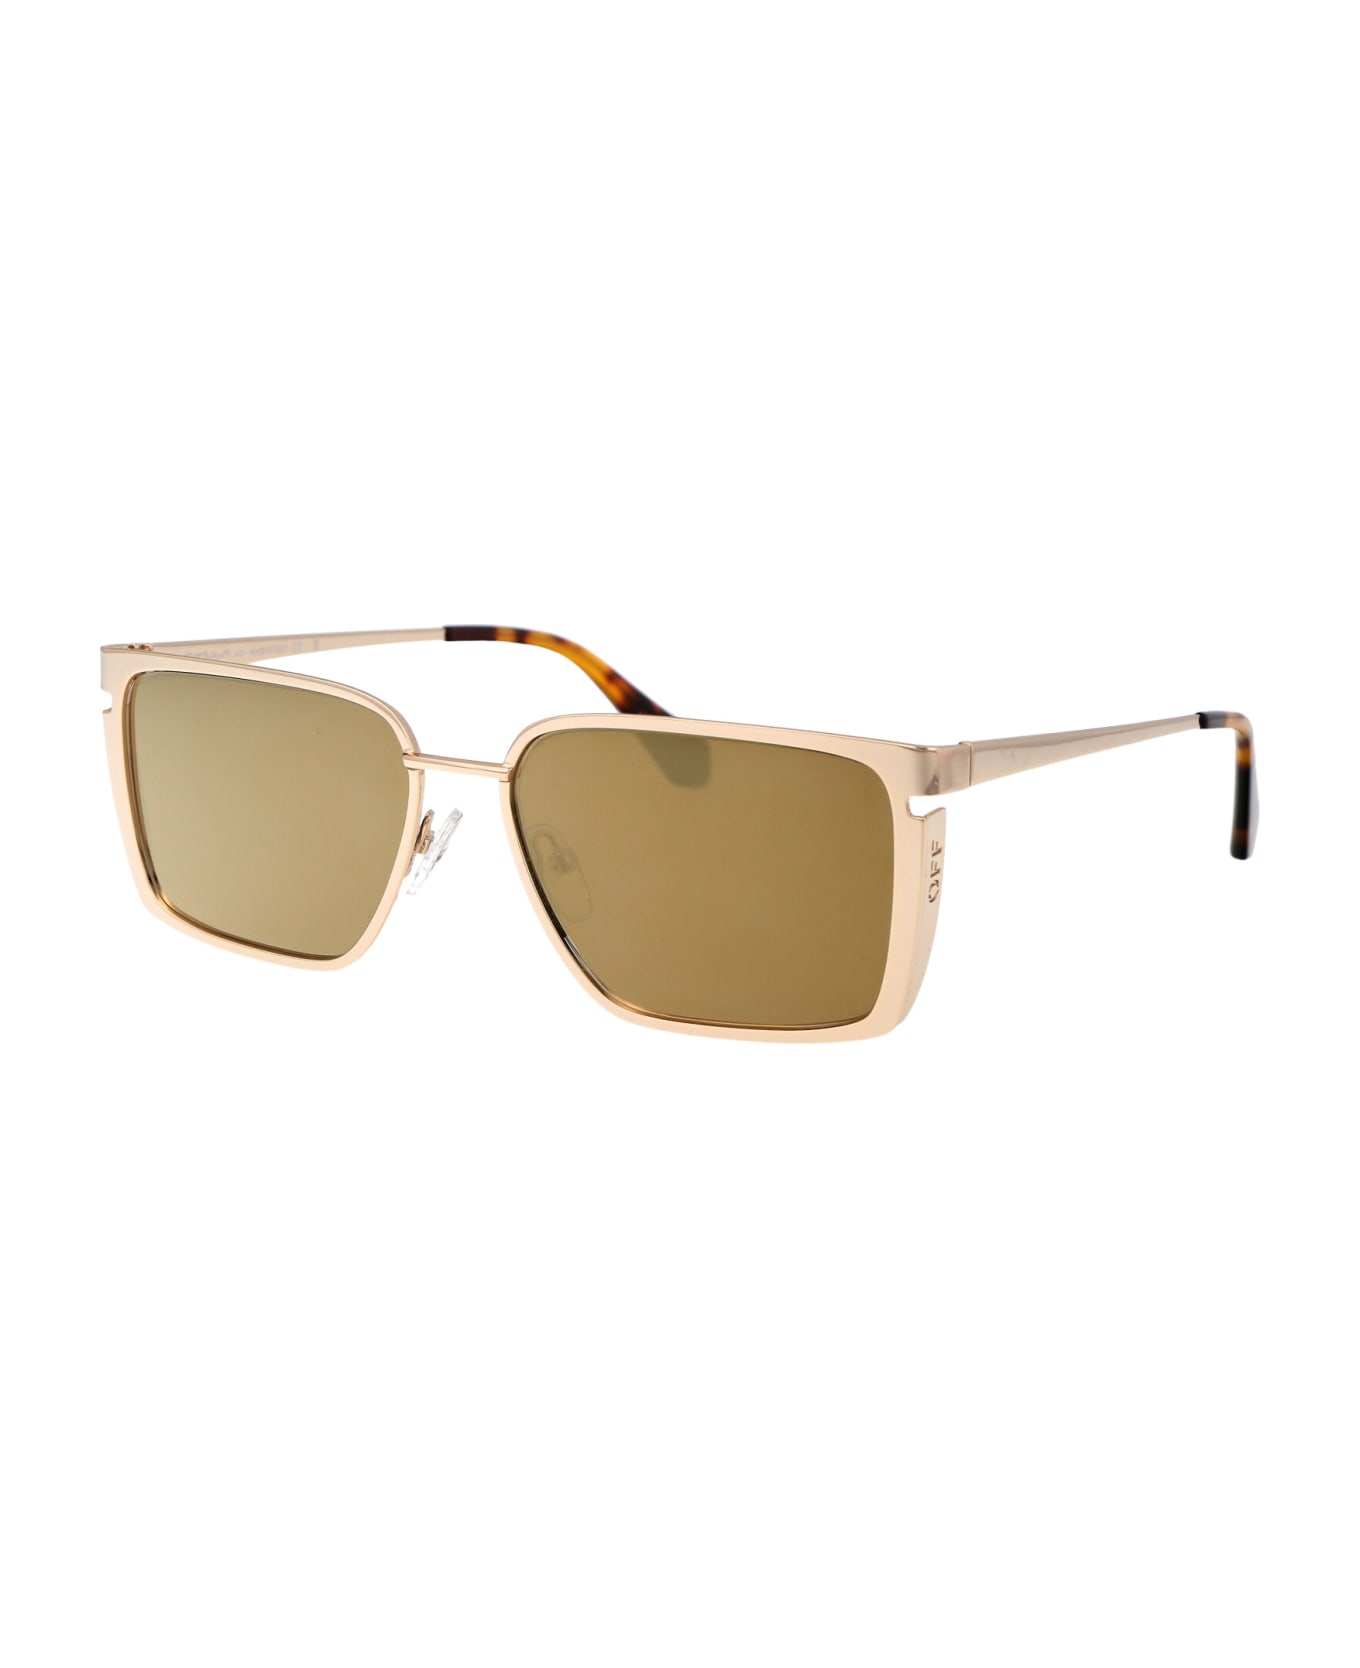 Off-White Yoder Sunglasses - 7676 GOLD GOLD 